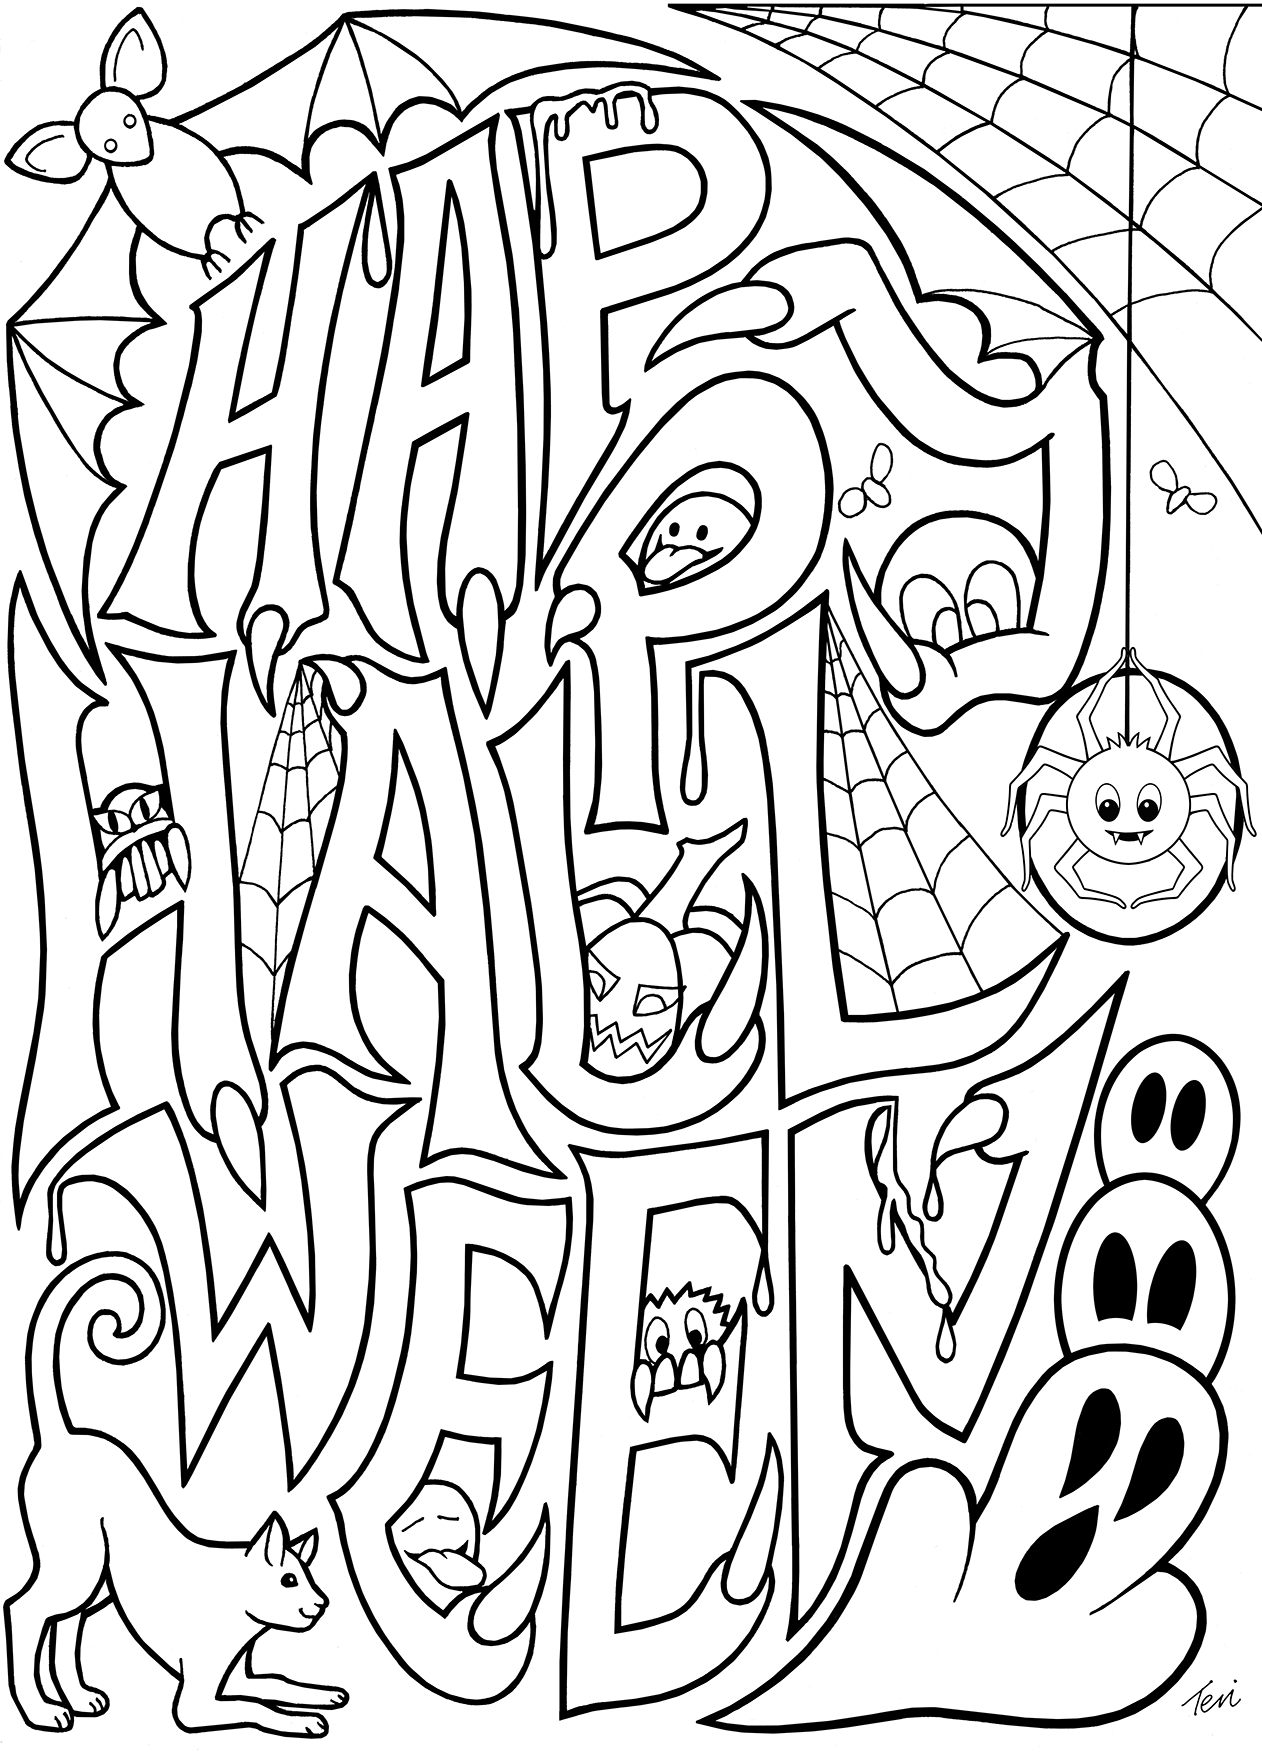 Get Coloring Pages Halloween Images COLORIST